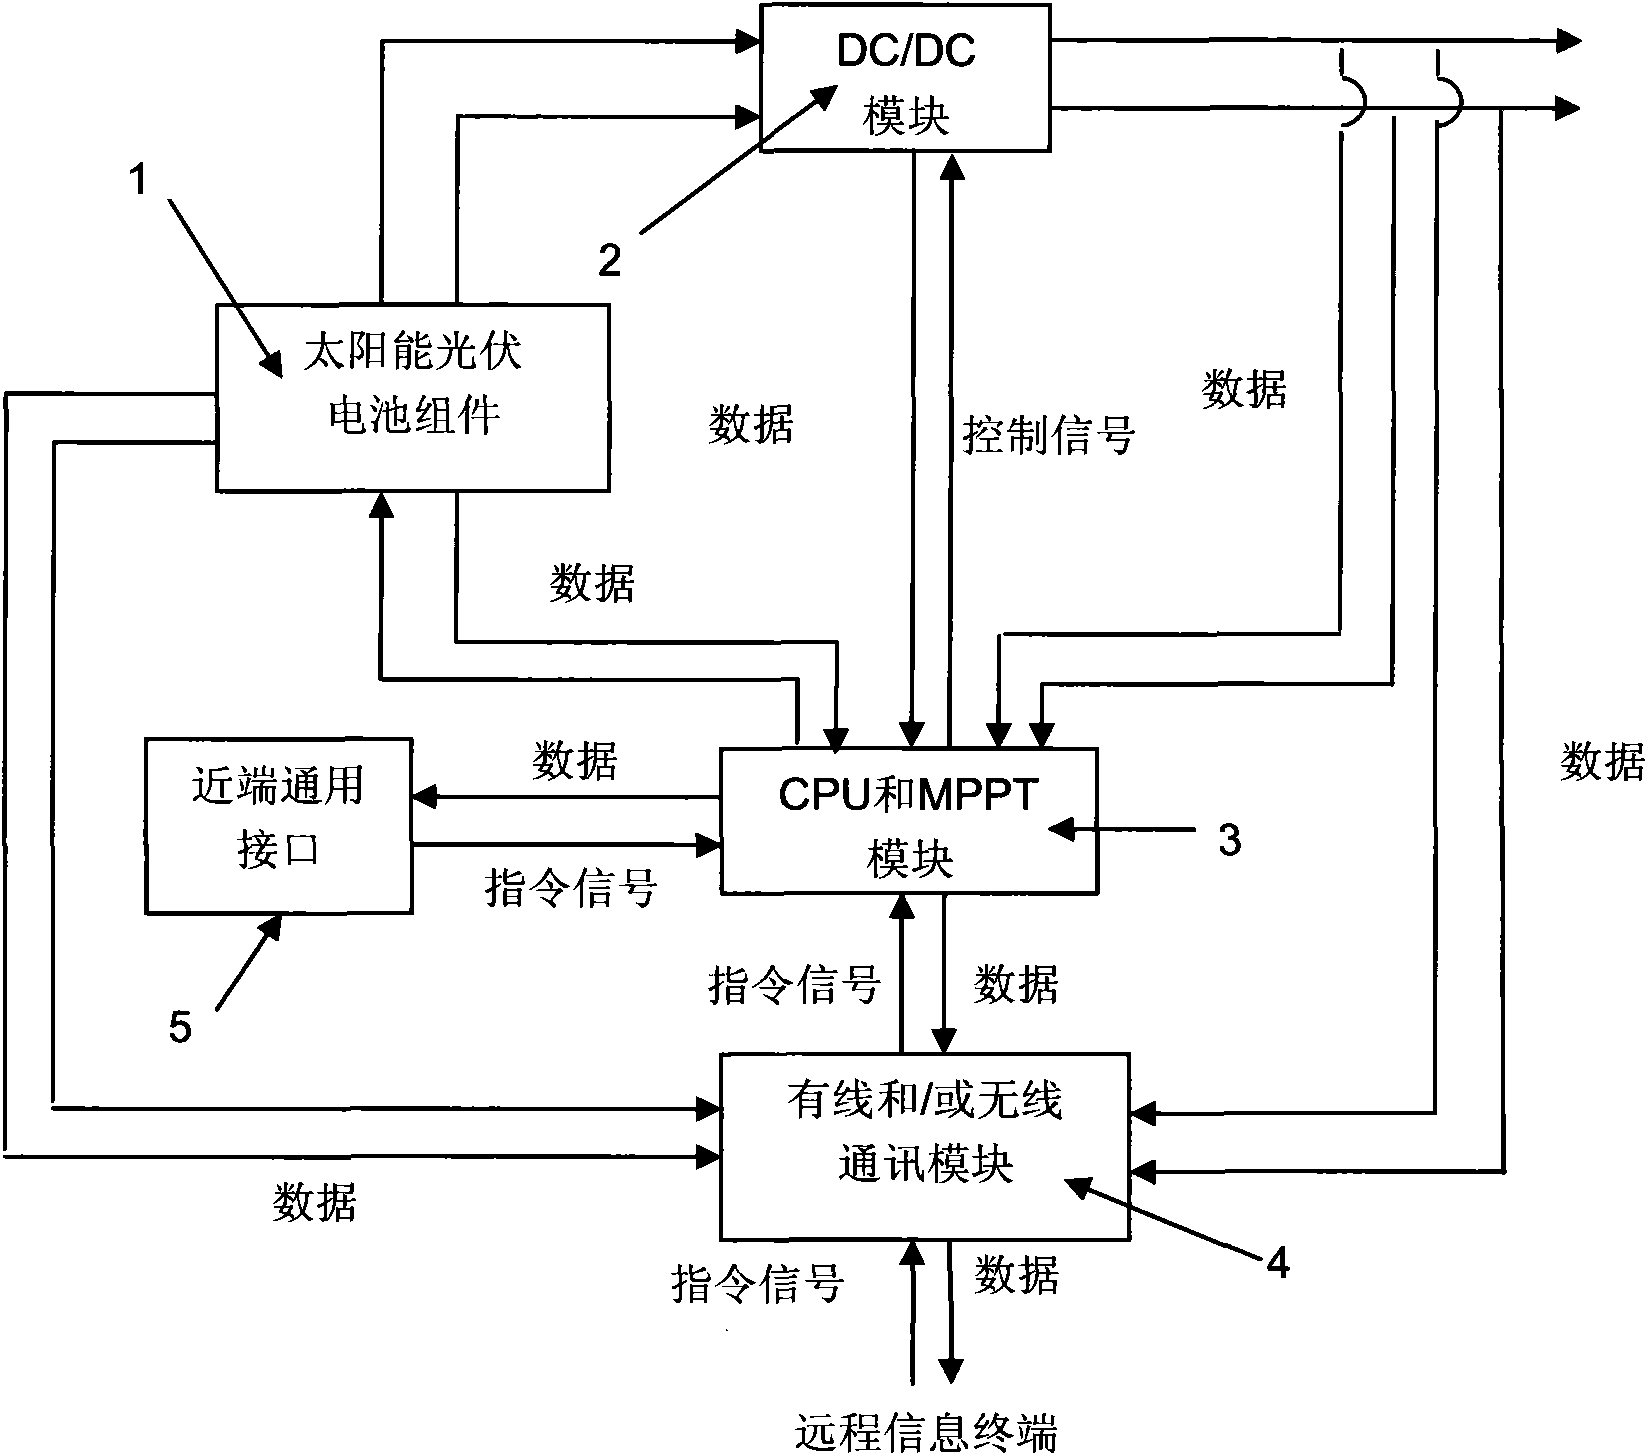 Solar photovoltaic control system with dynamic adjustable output of current and voltage